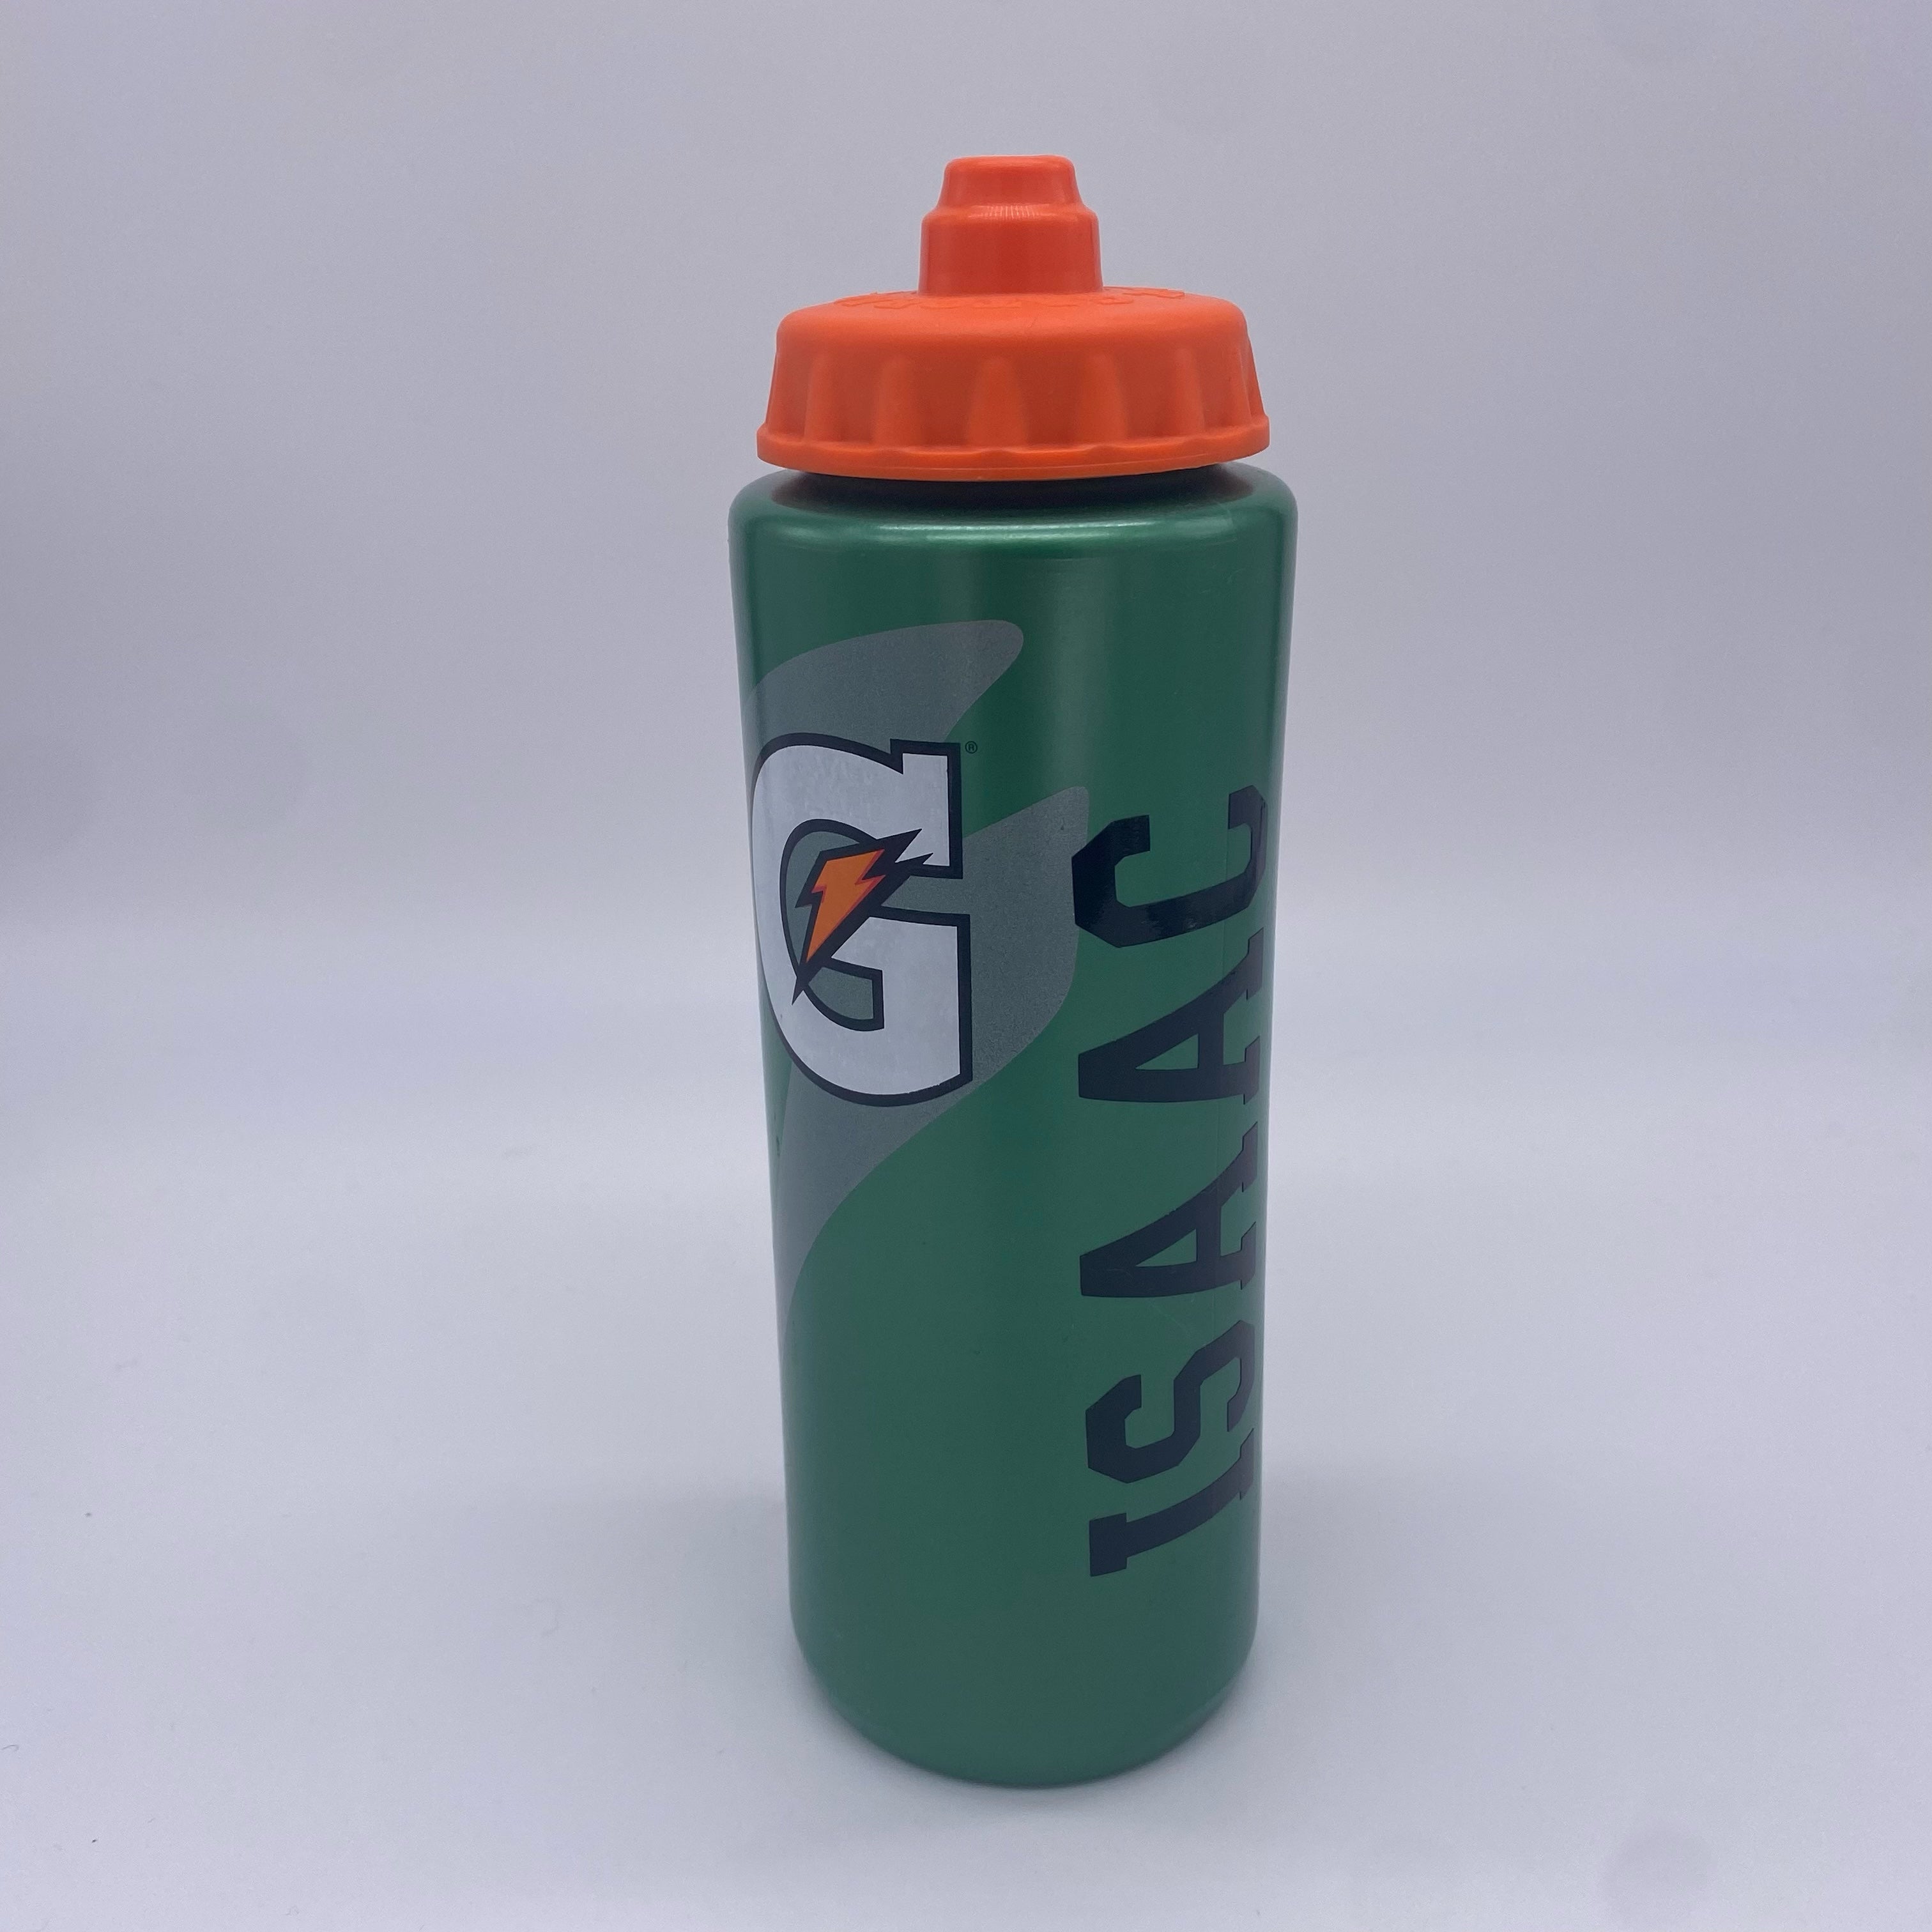 I've had this $6 Gatorade water bottle for 8 years, and used it every day.  Maybe this is a lame BIFL but the lesson is that durable materials and only  1 breakable